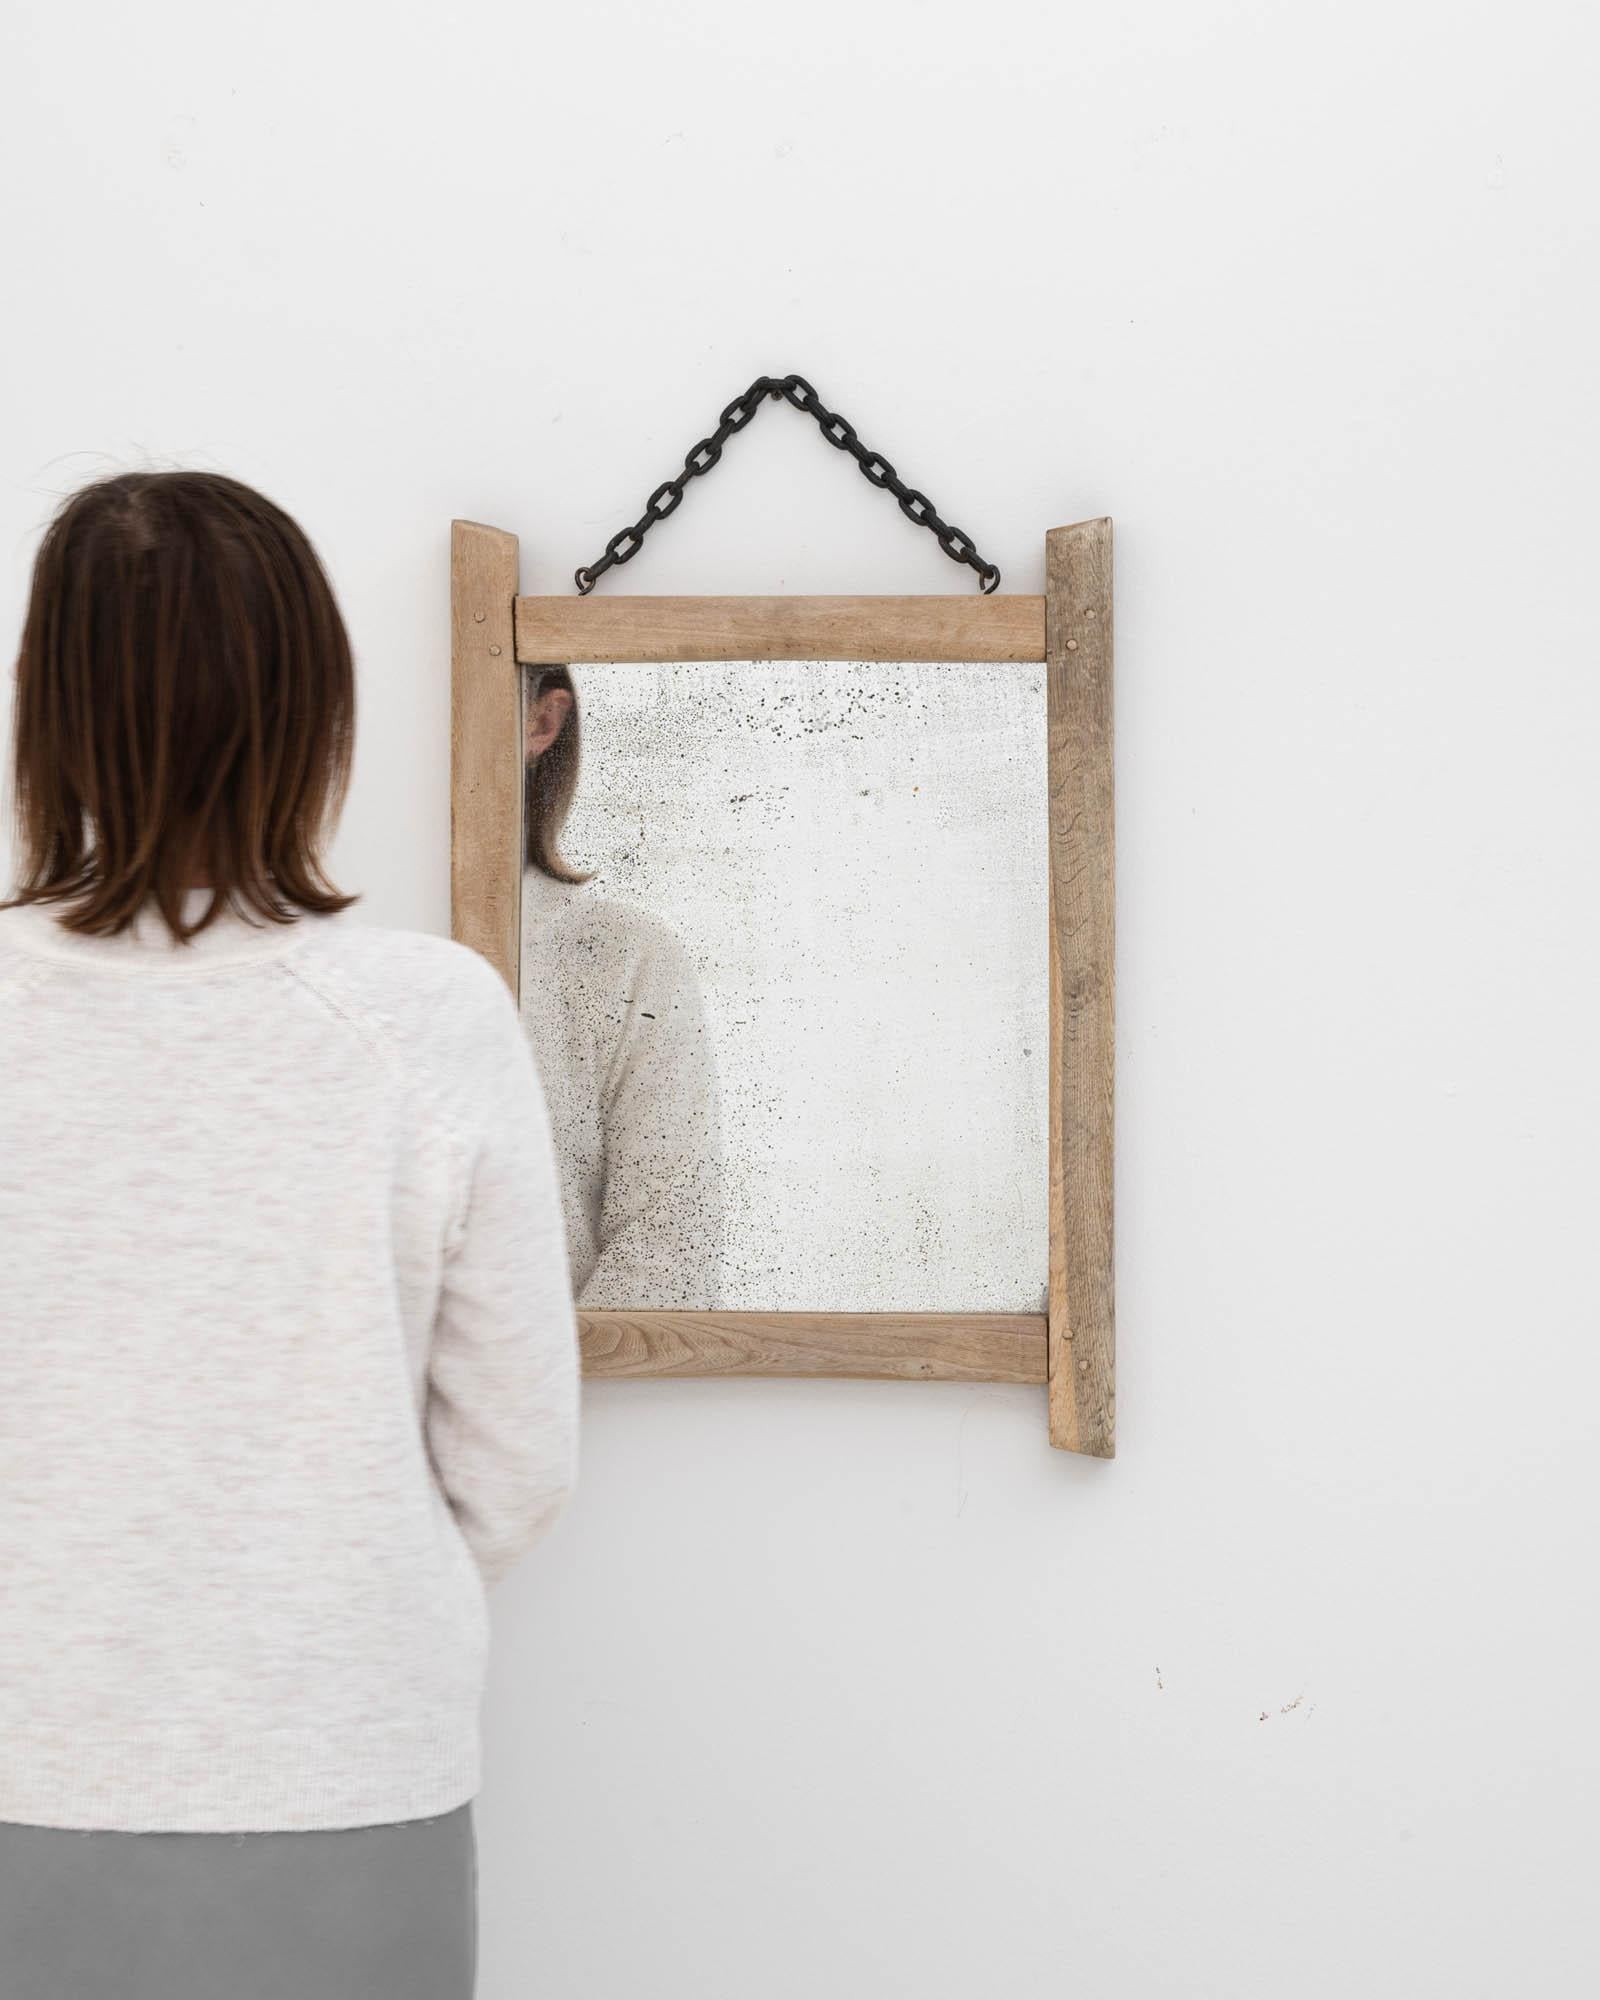 This 20th Century Belgian bleached oak mirror is a minimalistic and serene piece that captures the essence of rustic charm. The pale, washed-out wood frame, weathered by time, brings a light, airy feel to any space, while the simple black chain adds